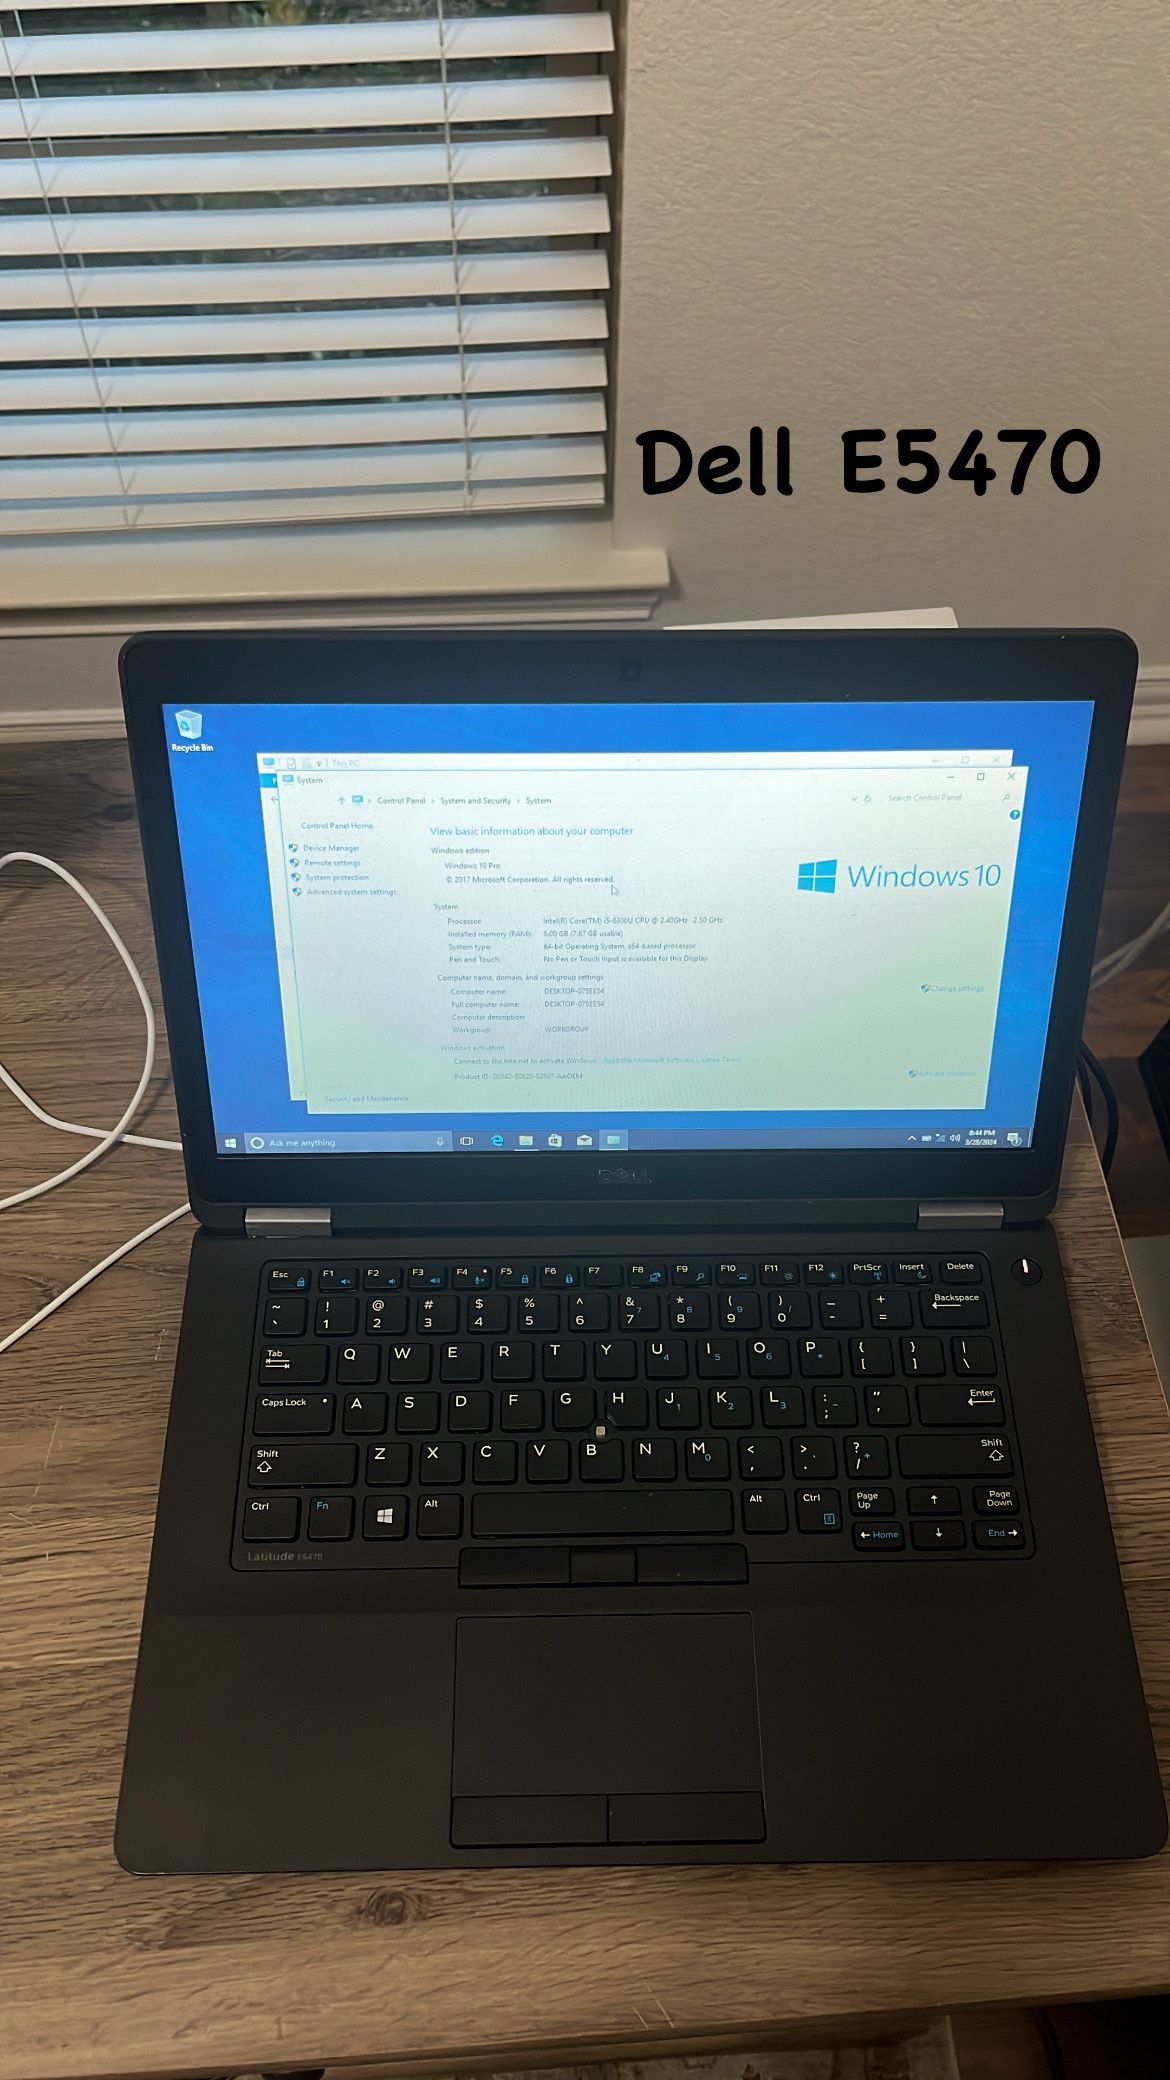 Dell Laptop i5 8gb 256gb Ssd- Price Firm